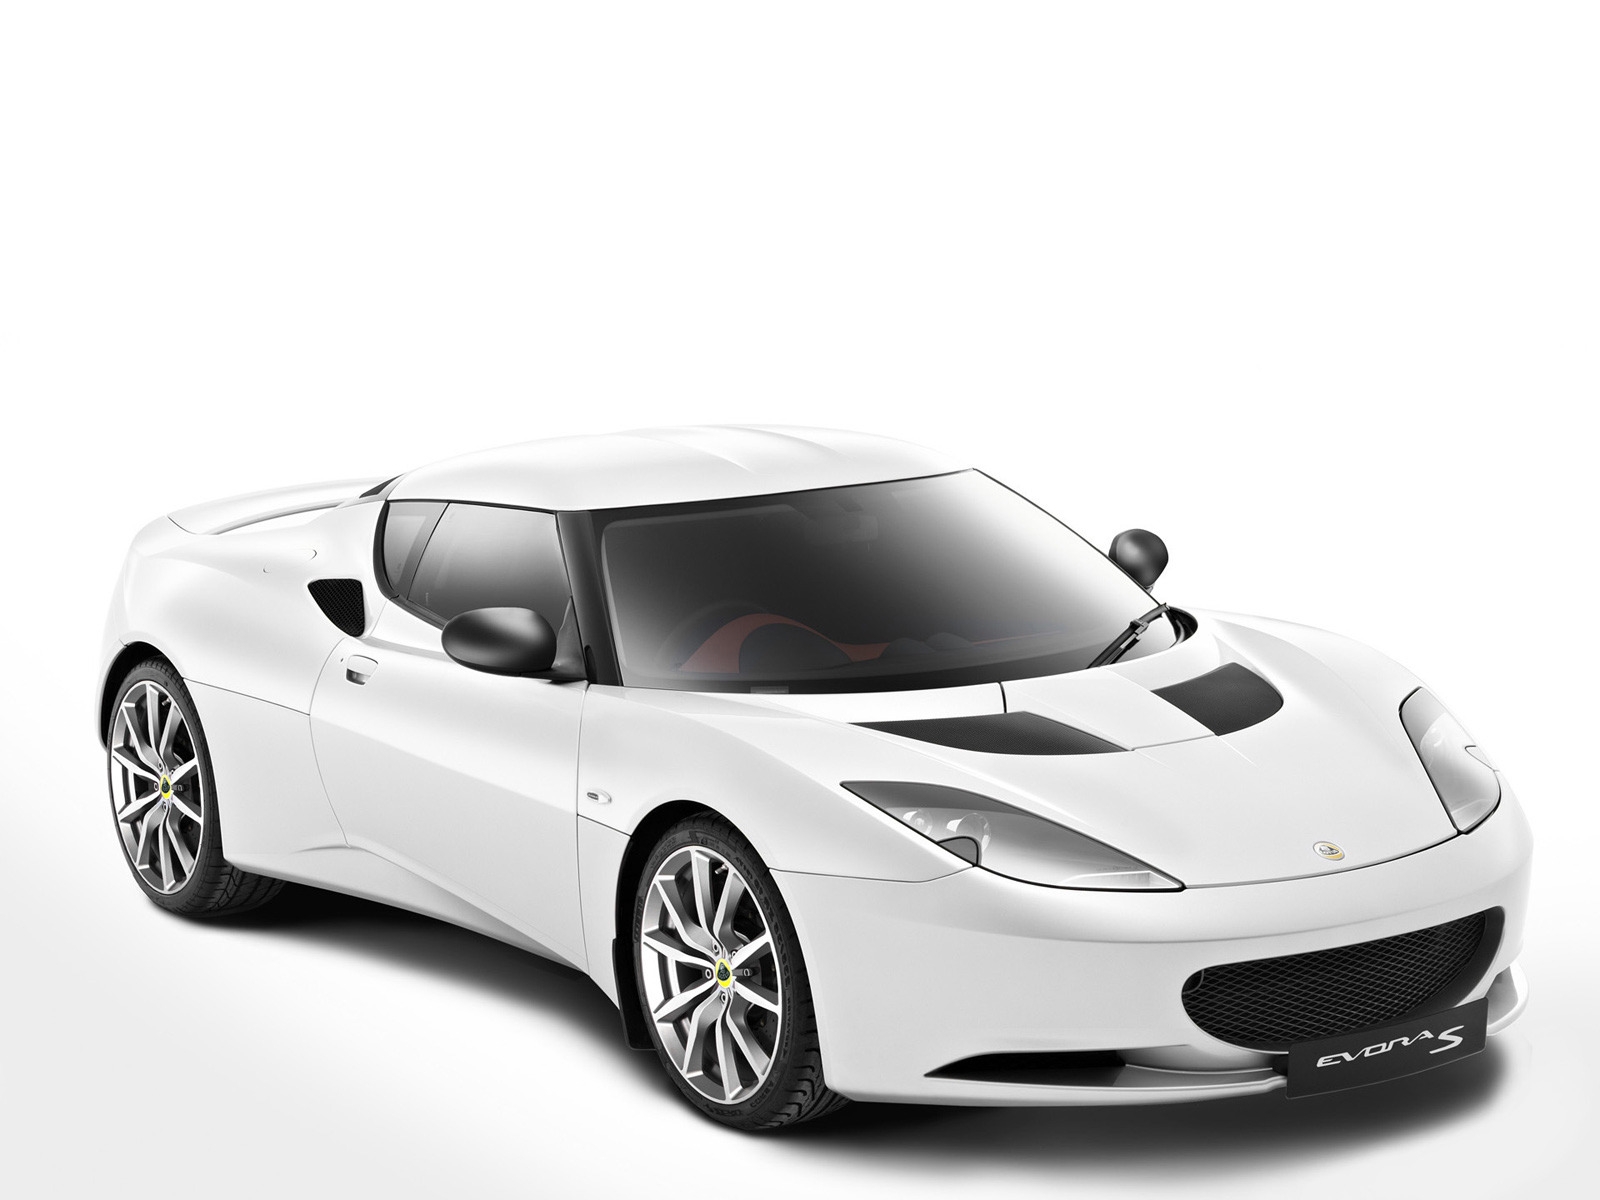 Lotus Evora S 2011 Front Angle for 1600 x 1200 resolution